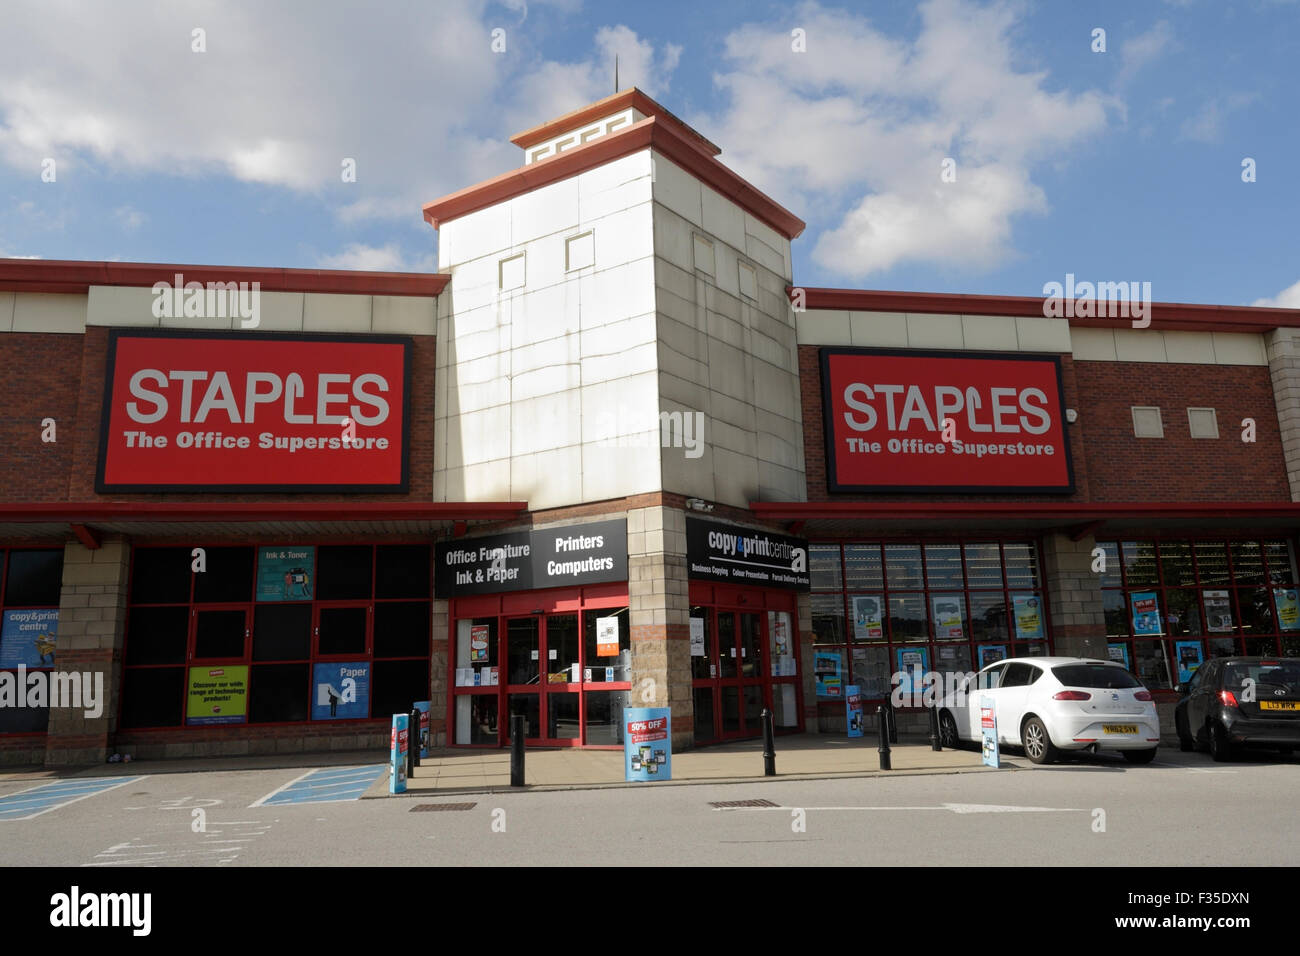 Staples office superstore in Sheffield Stock Photo